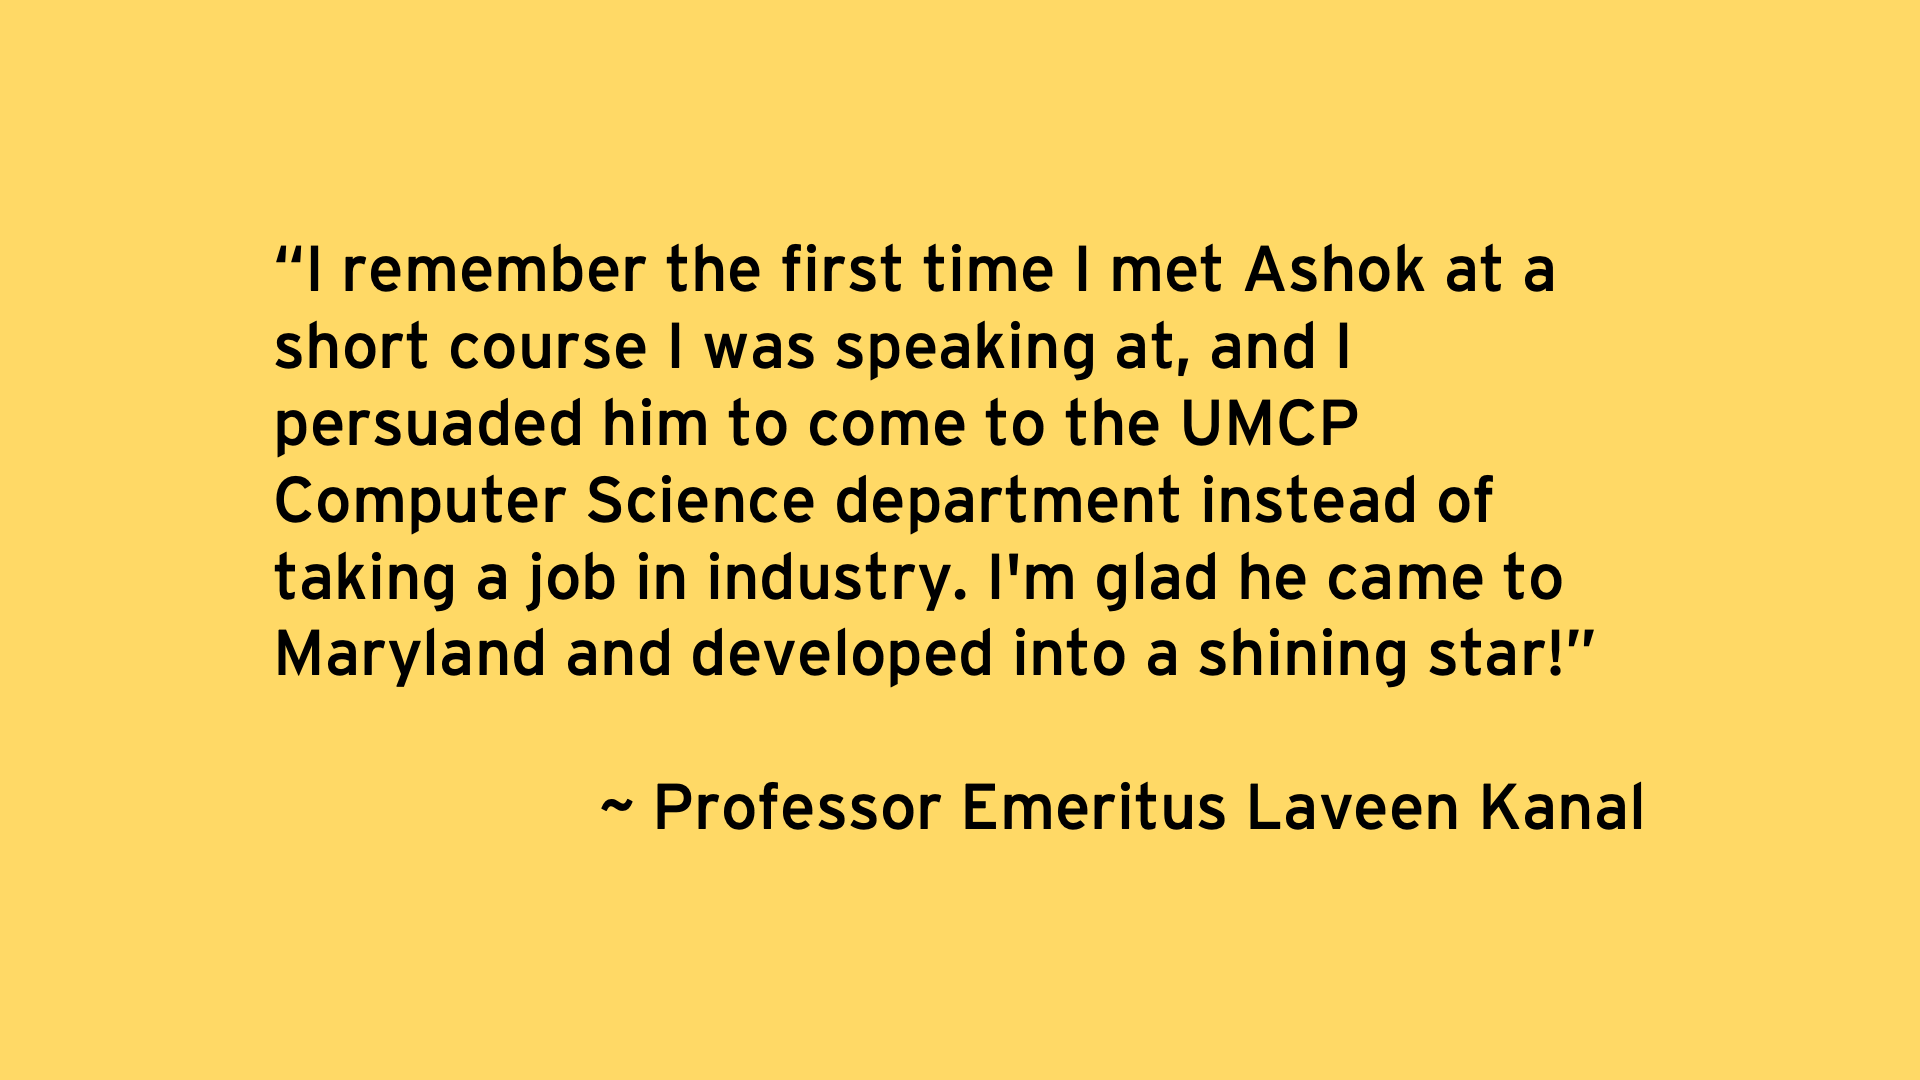 I remember the first time I met Ashok at a short course I was speaking at, and I persuaded him to come to the UMCP Computer Science department instead of taking a job in industry. I'm glad he came to Maryland and developed into a shining star! - Professor Emeritus Laveen Kanal